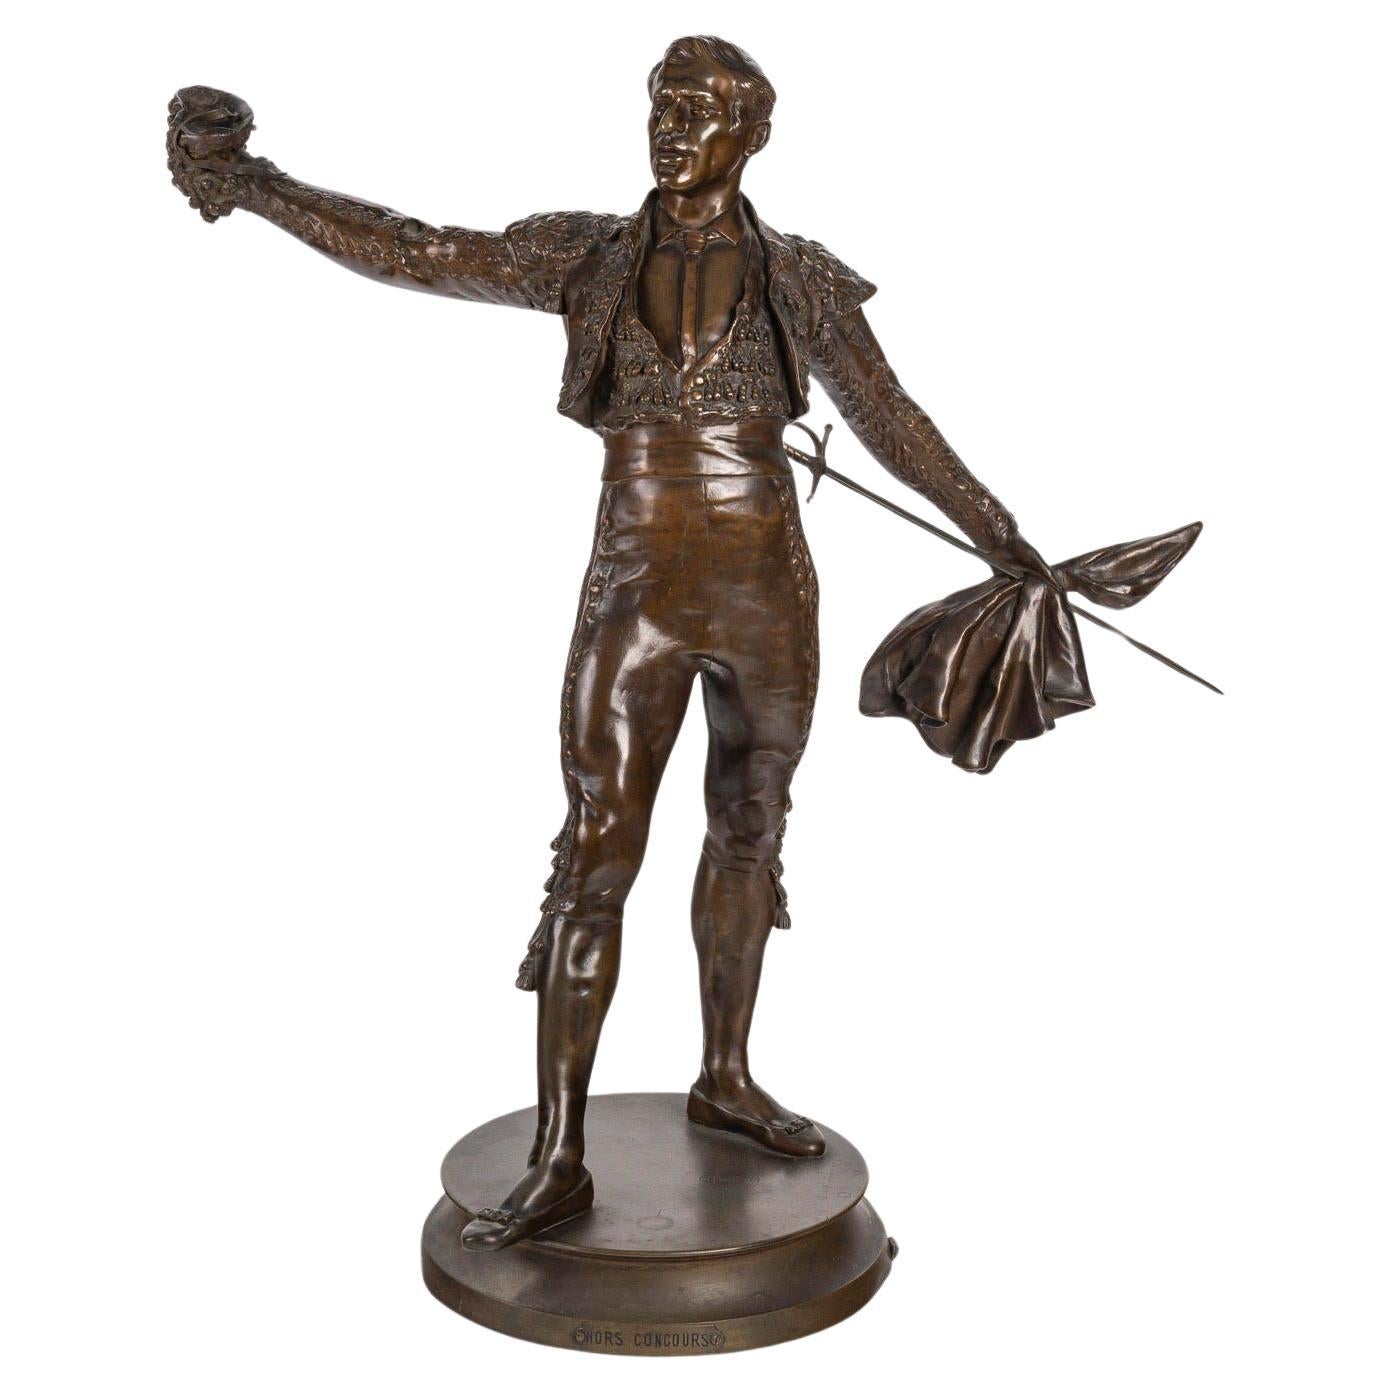 Patinated bronze sculpture of a toreador, early 20th century.

Sculpture by the sculptor Descay in patinated bronze representing a toreador in costume, early 20th century.
H: 67cm, W: 73cm, D: 32cm